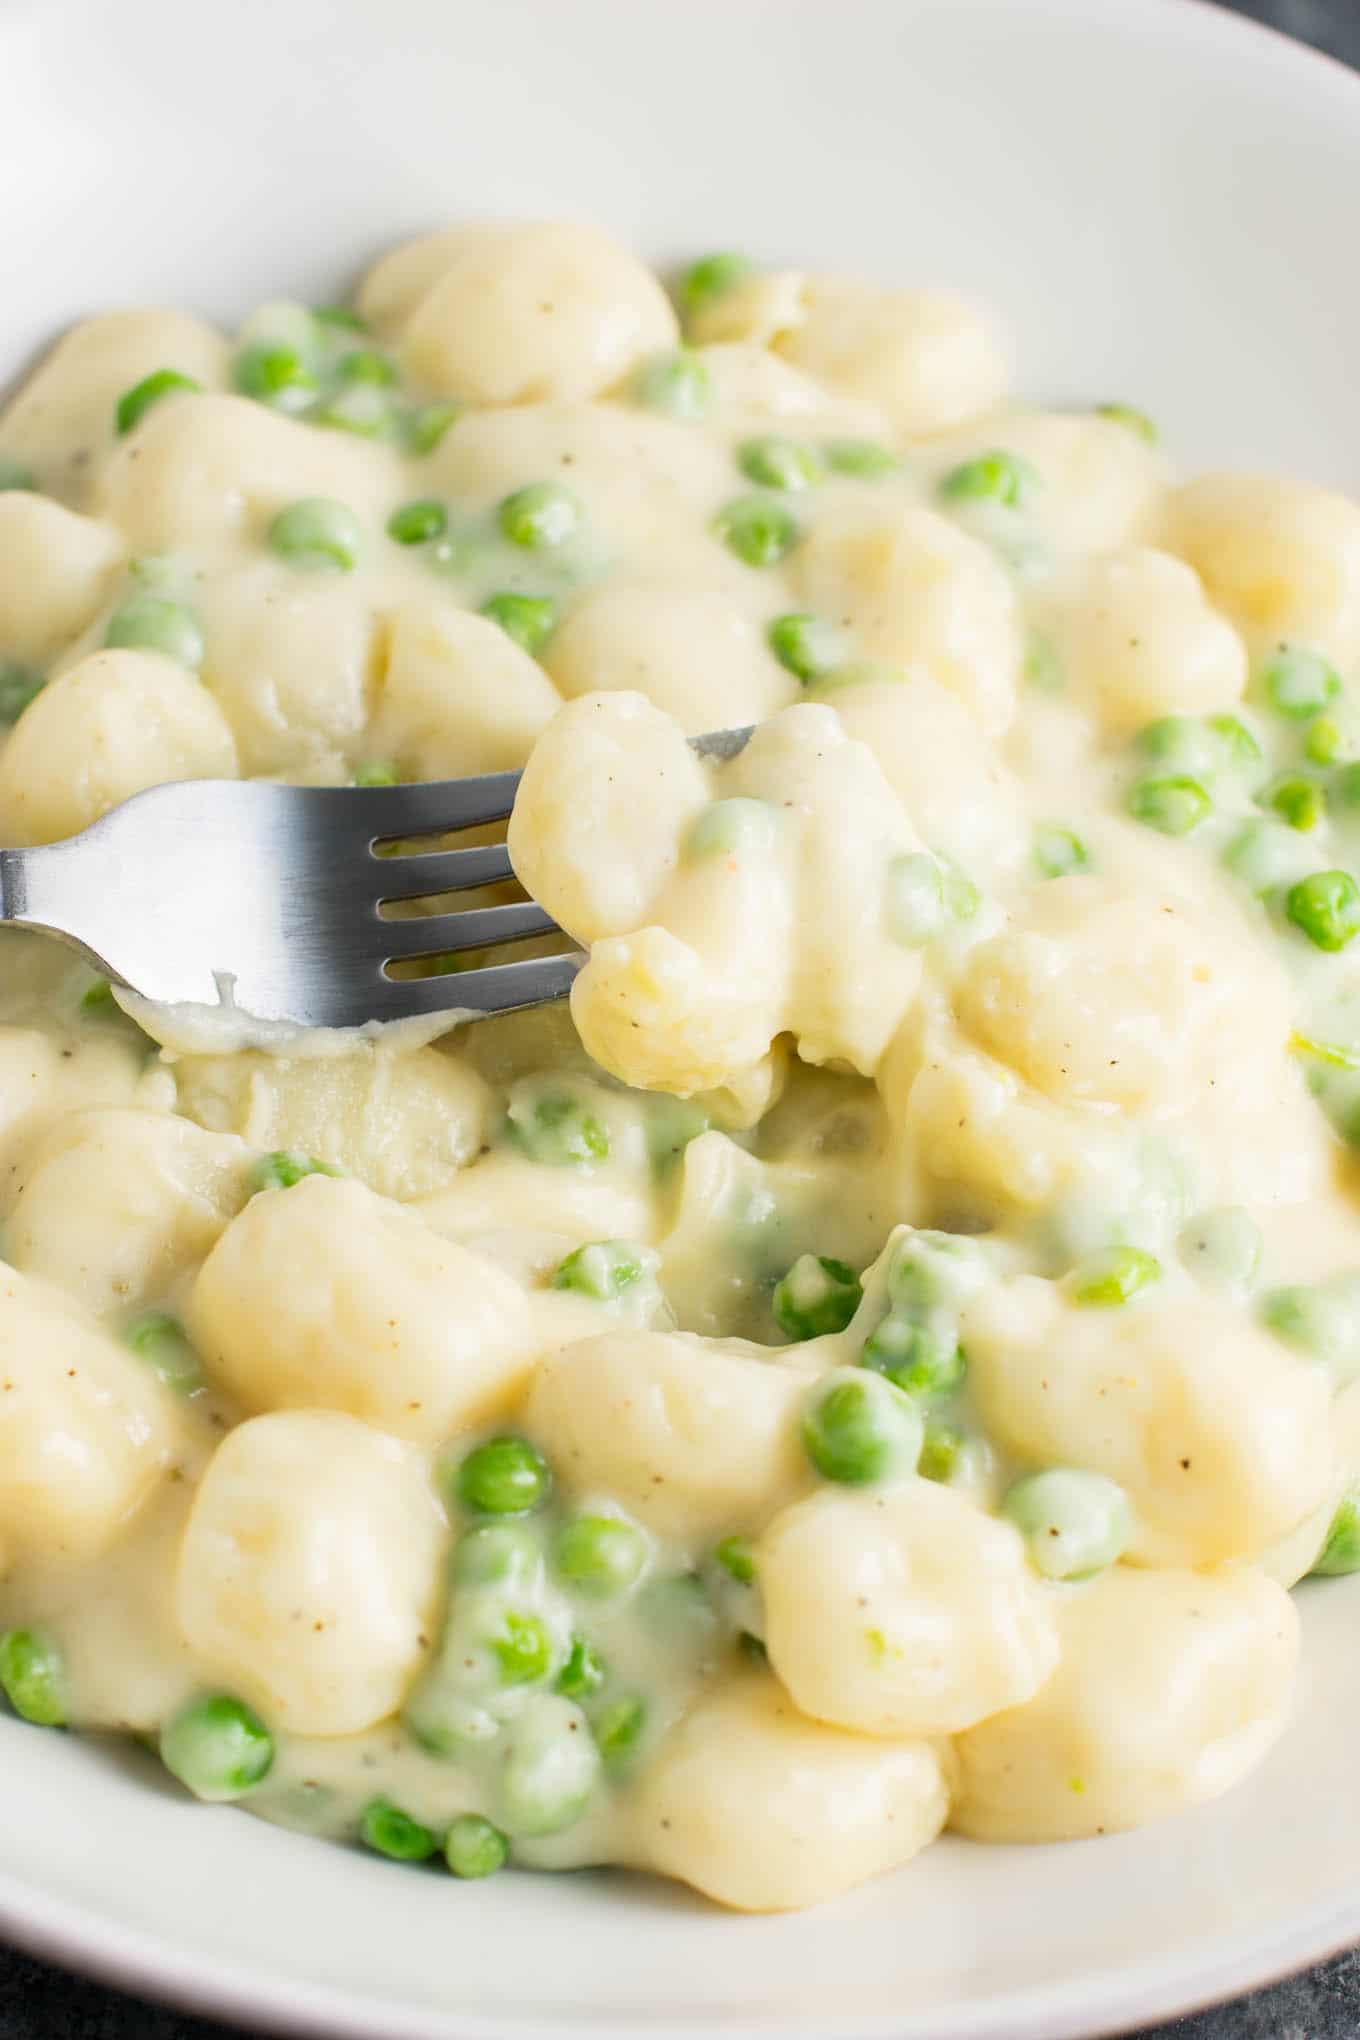 Ultra creamy gnocchi macaroni and cheese recipe with peas. A cheesy gnocchi comfort food recipe made in less than 15 minutes. 